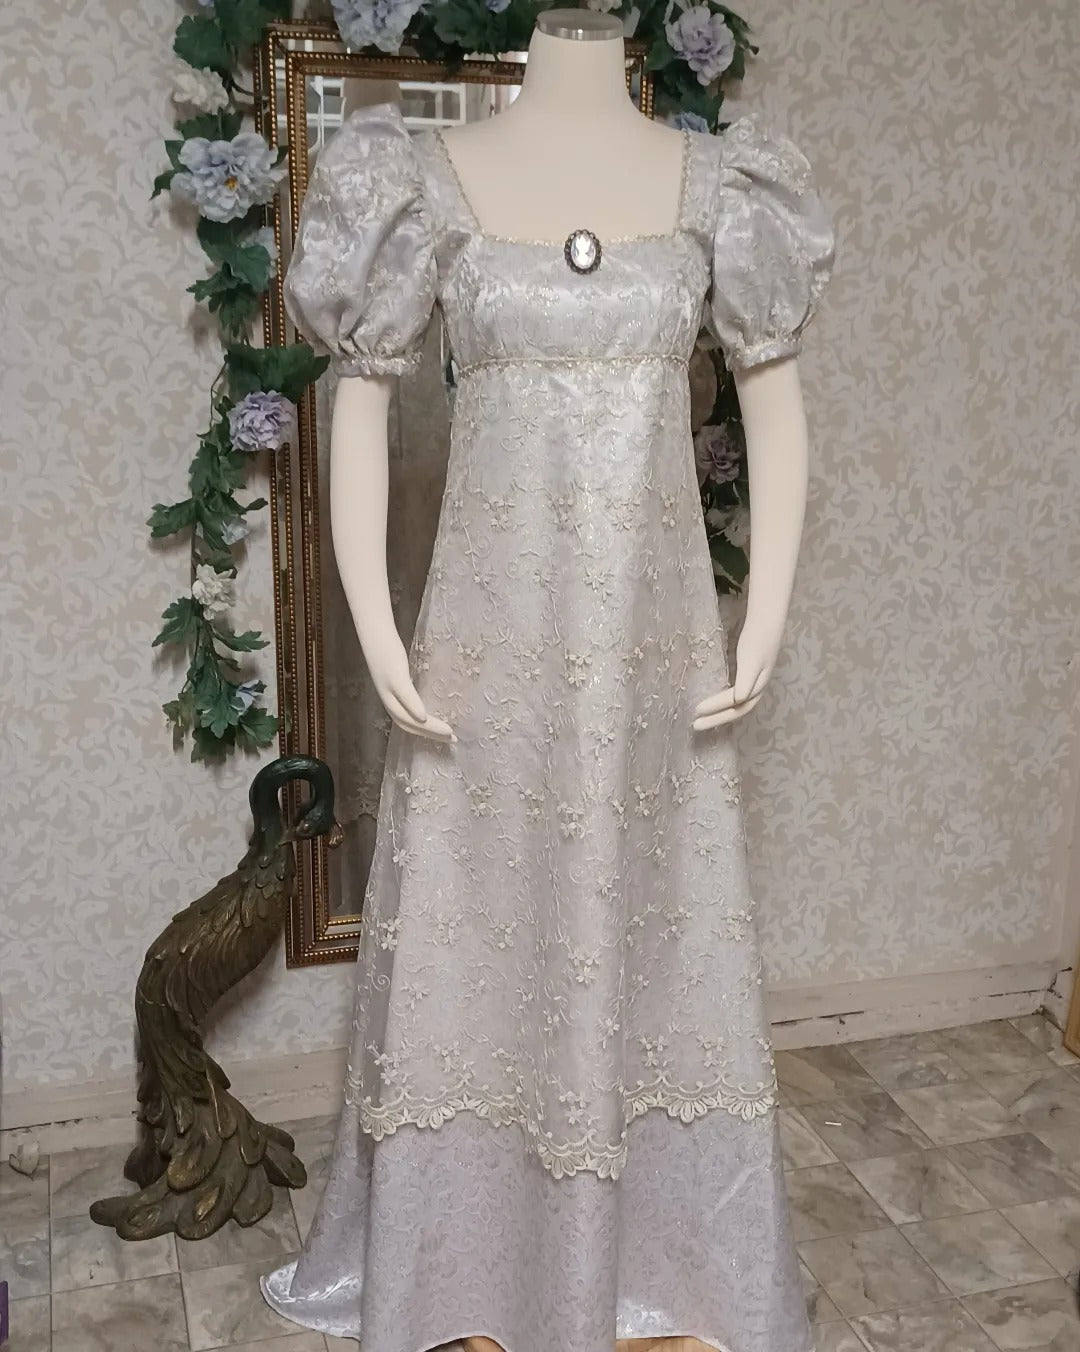 Lilac/Champagne Regency Style gown and Coat Size Small